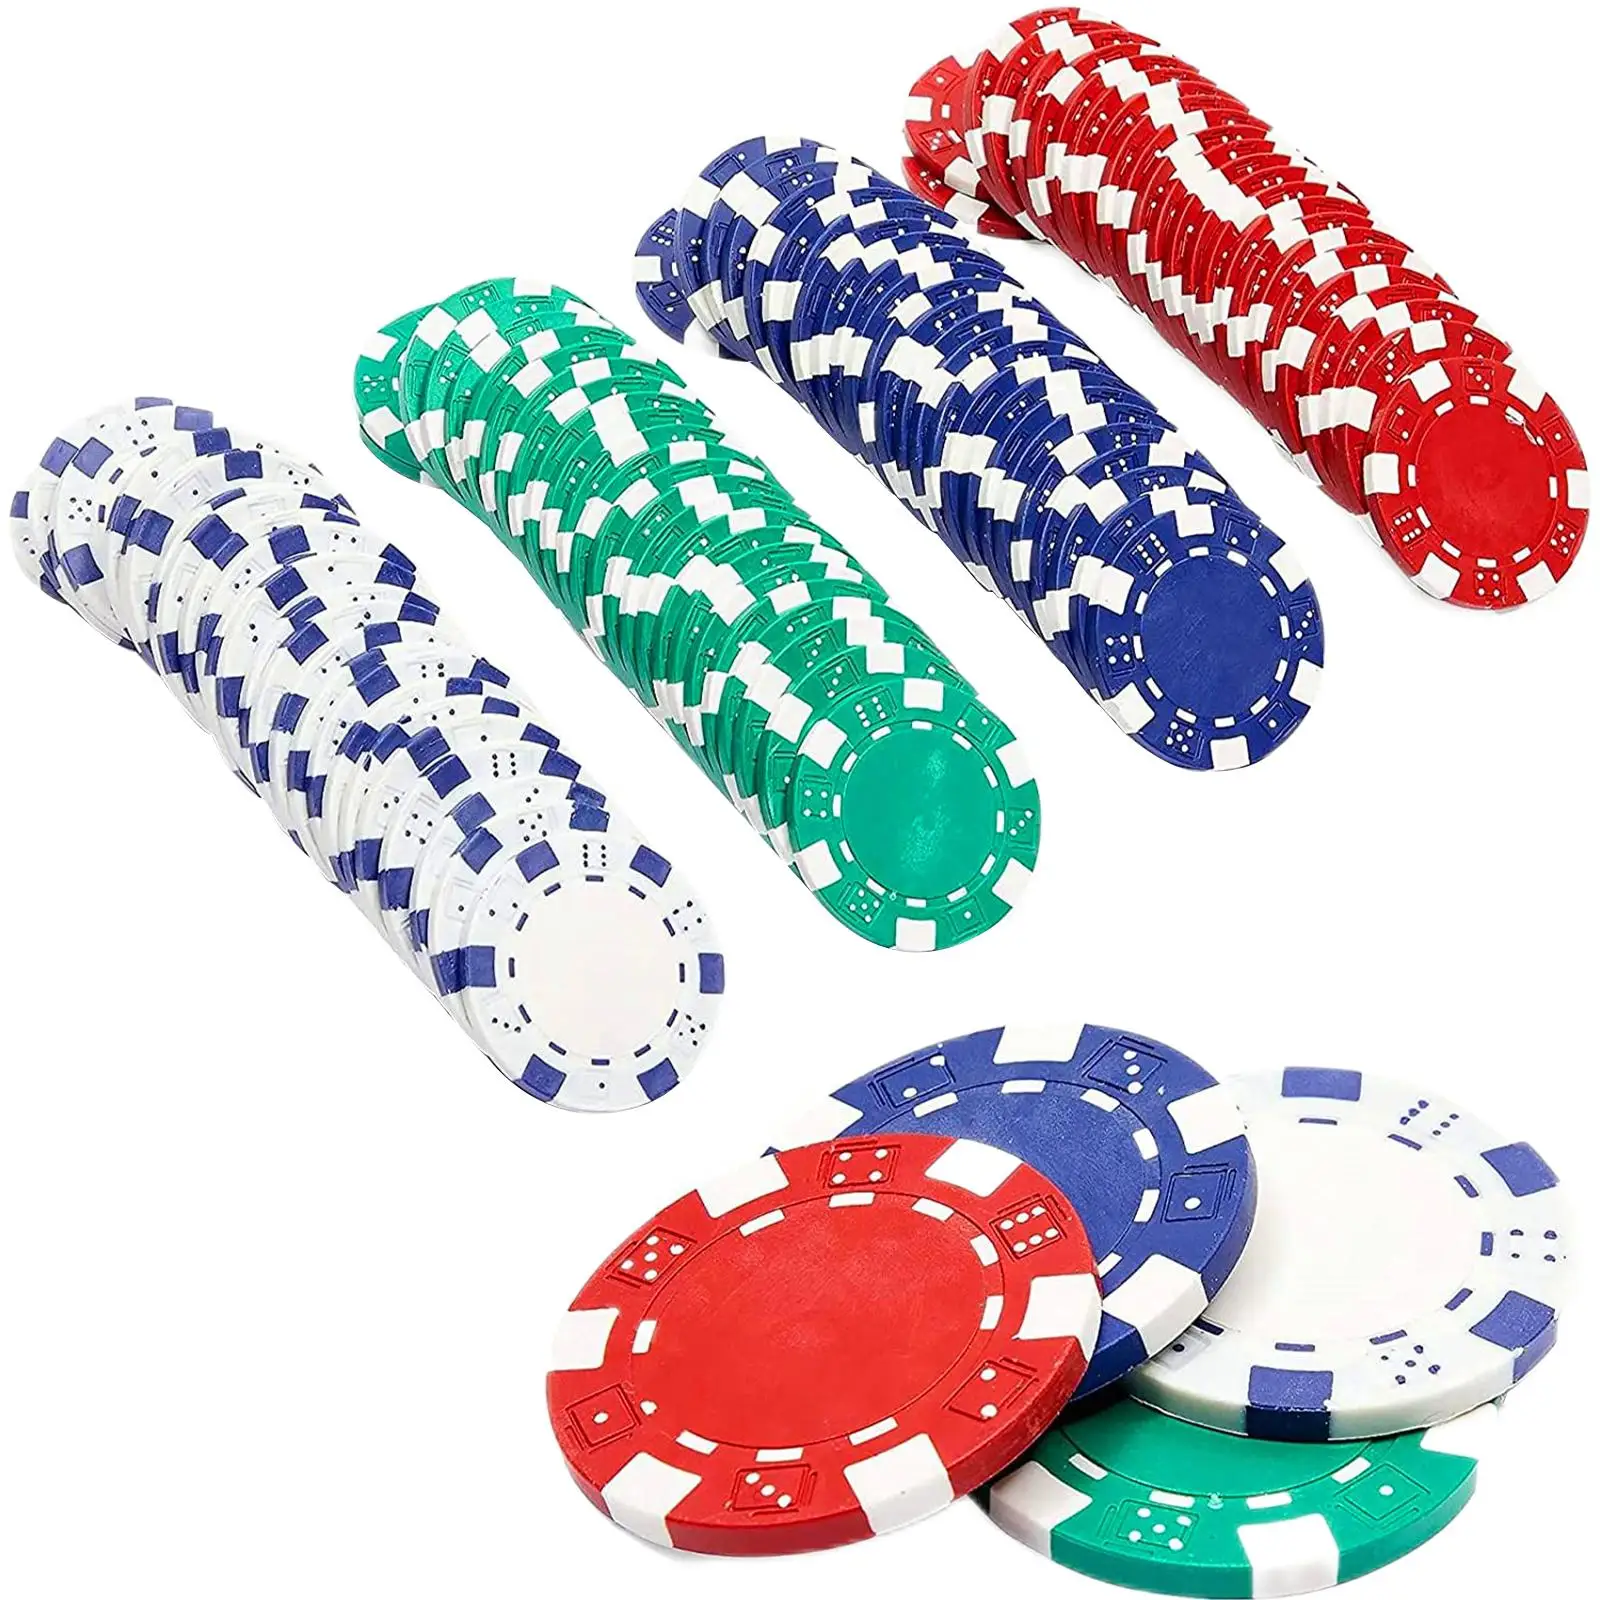 100 Pieces Poker Chips Game Tokens Bingo Chips Markers for Party Activities